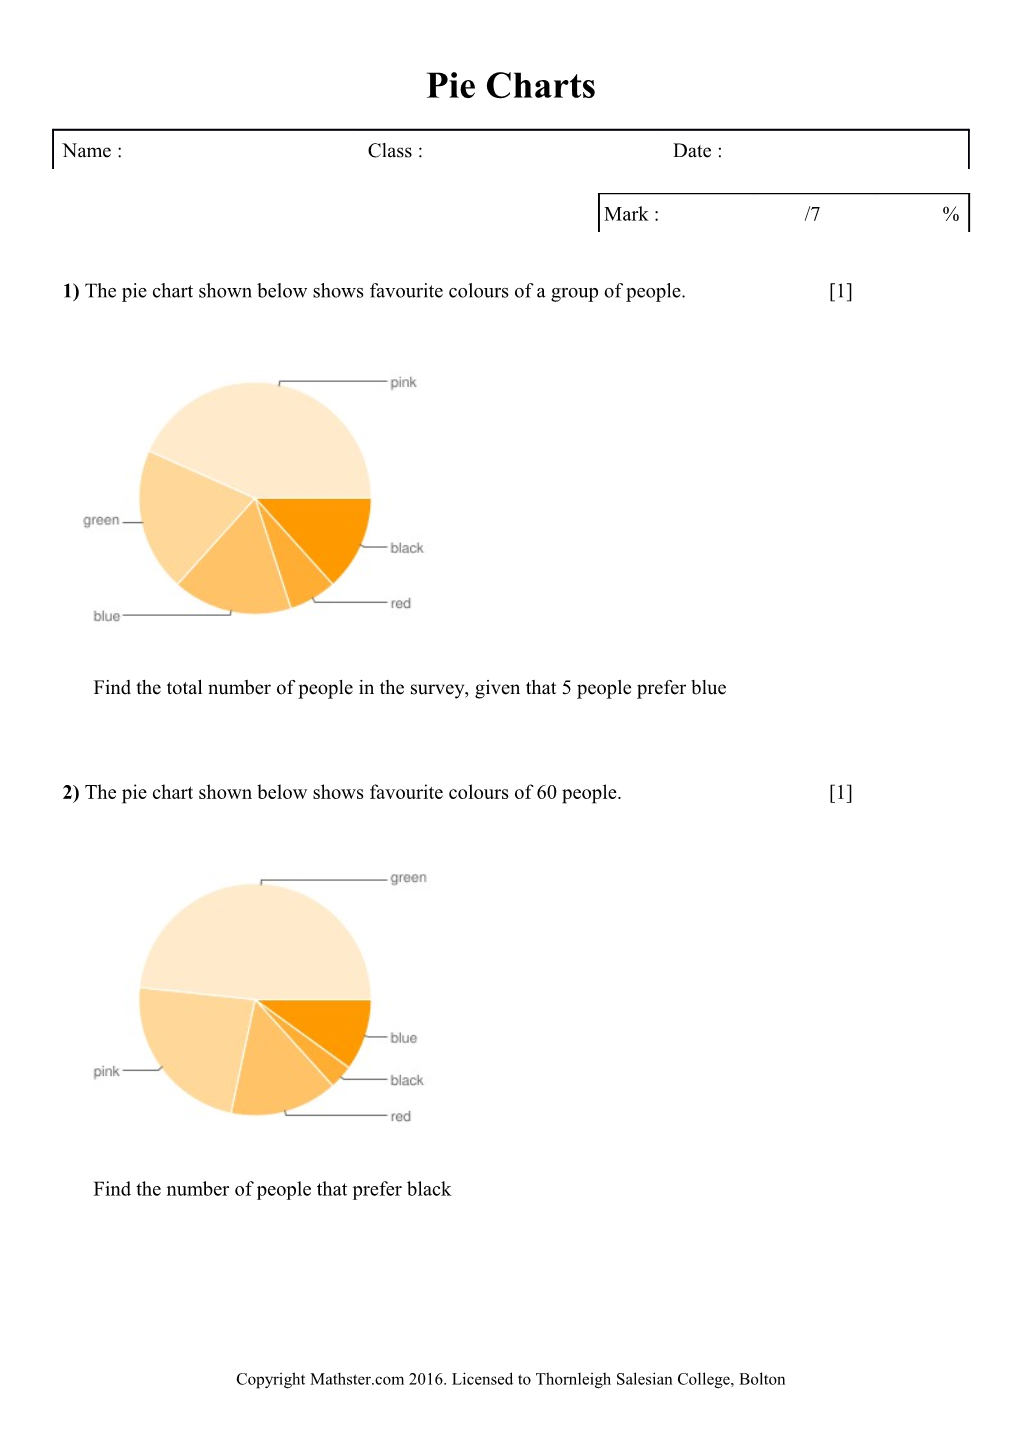 Solutions for the Assessment Pie Charts